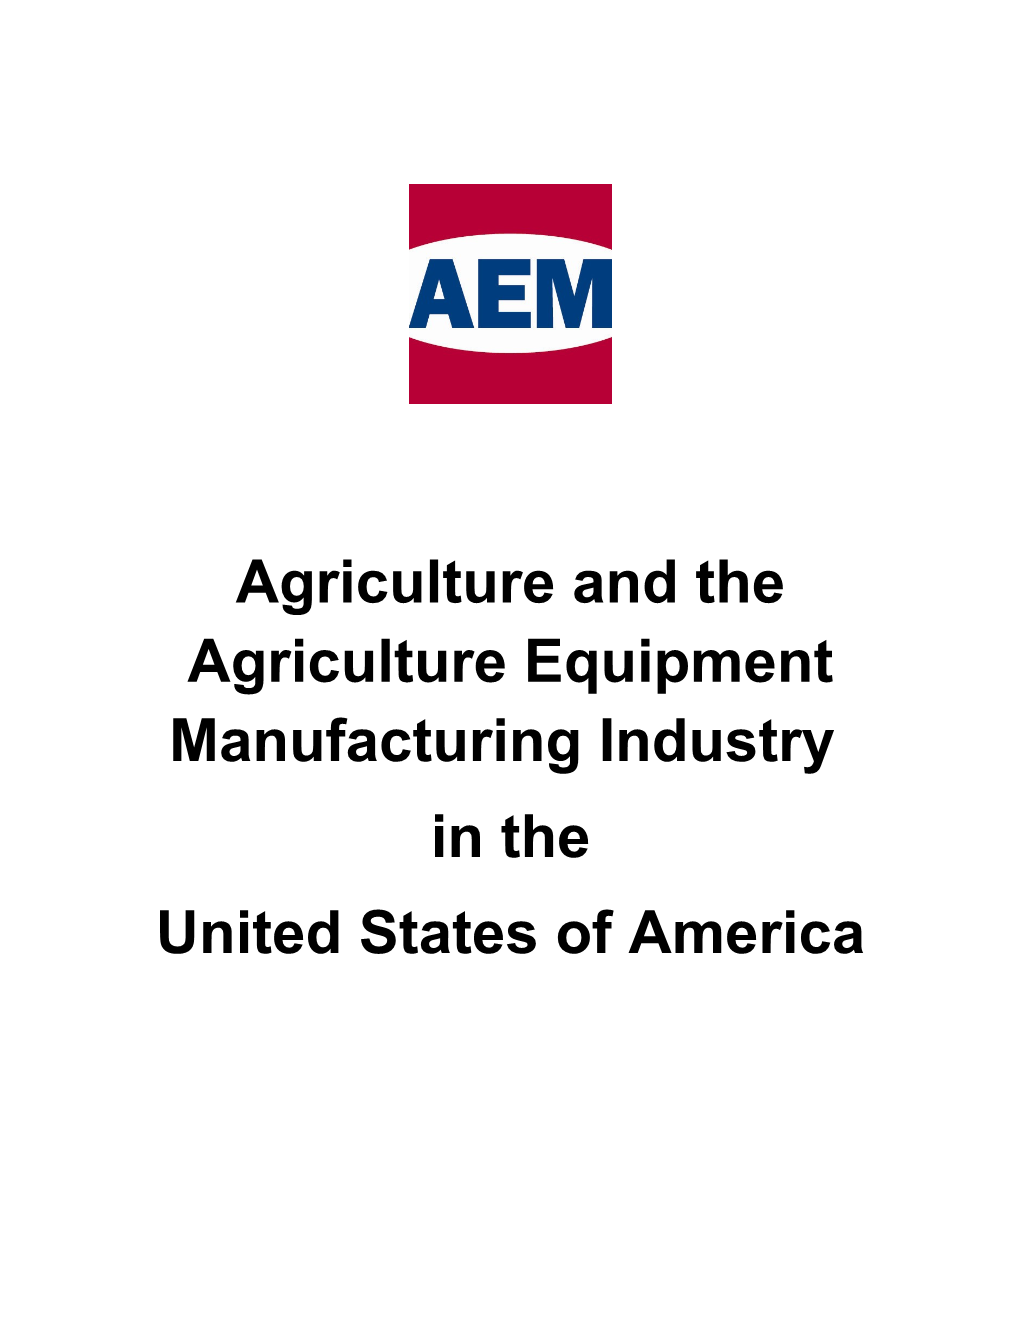 Agriculture and the Agriculture Equipment Manufacturing Industry